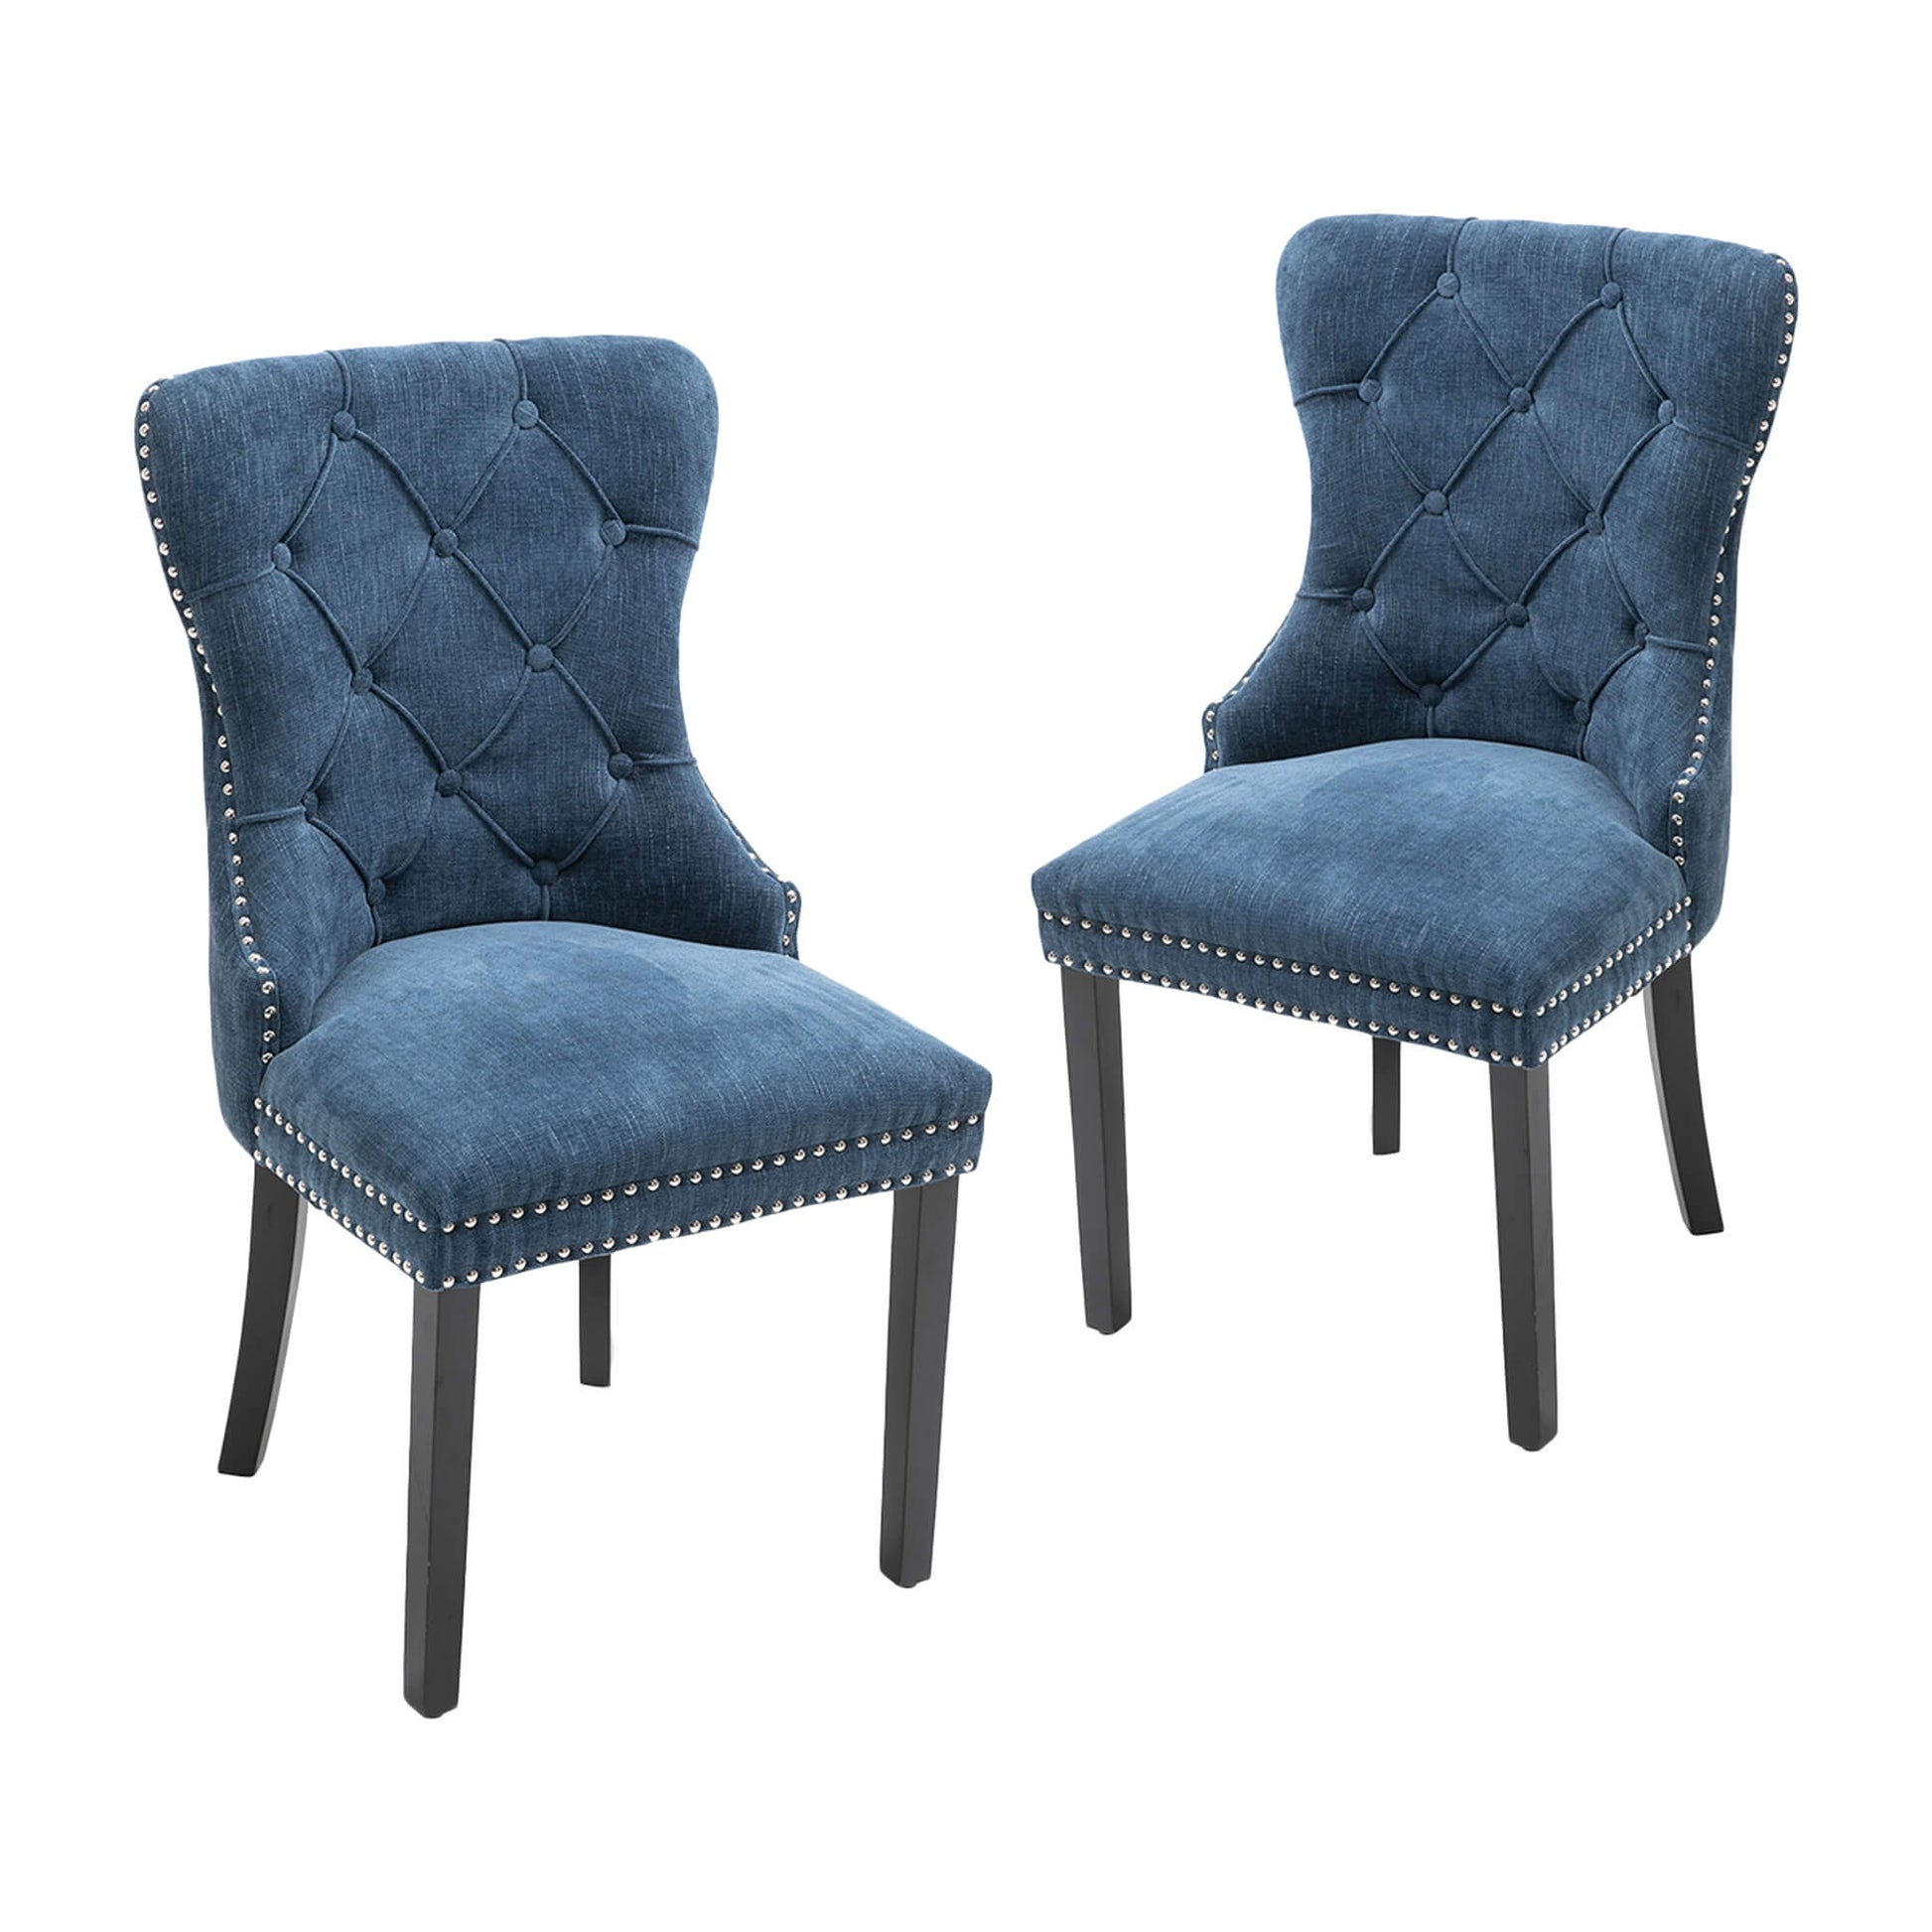 Genoa Version 1 | Fabric French Provincial Wooden Dining Chairs | Set Of 2 | Navy